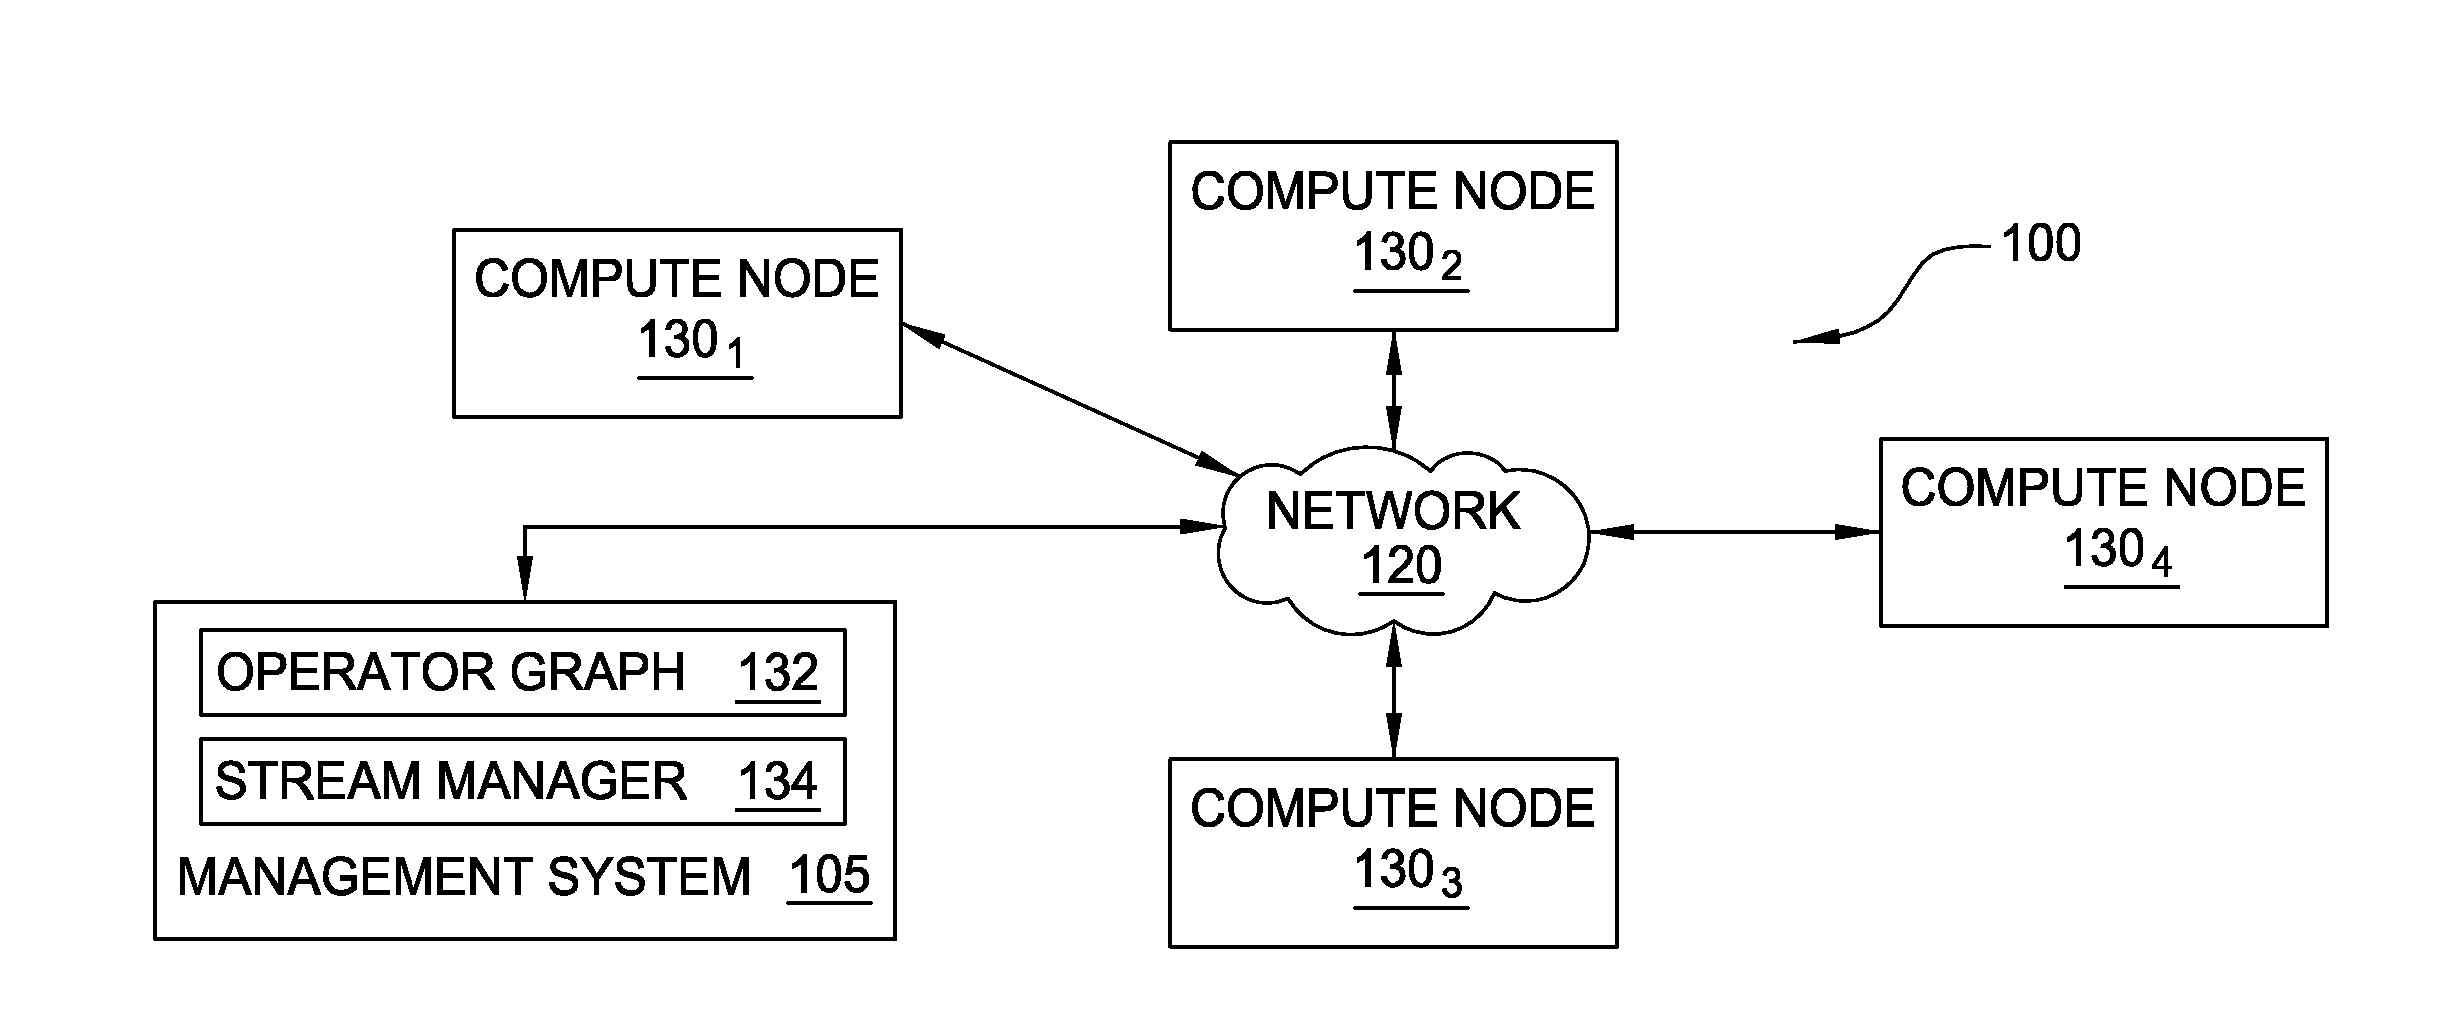 Triggering window conditions by streaming features of an operator graph